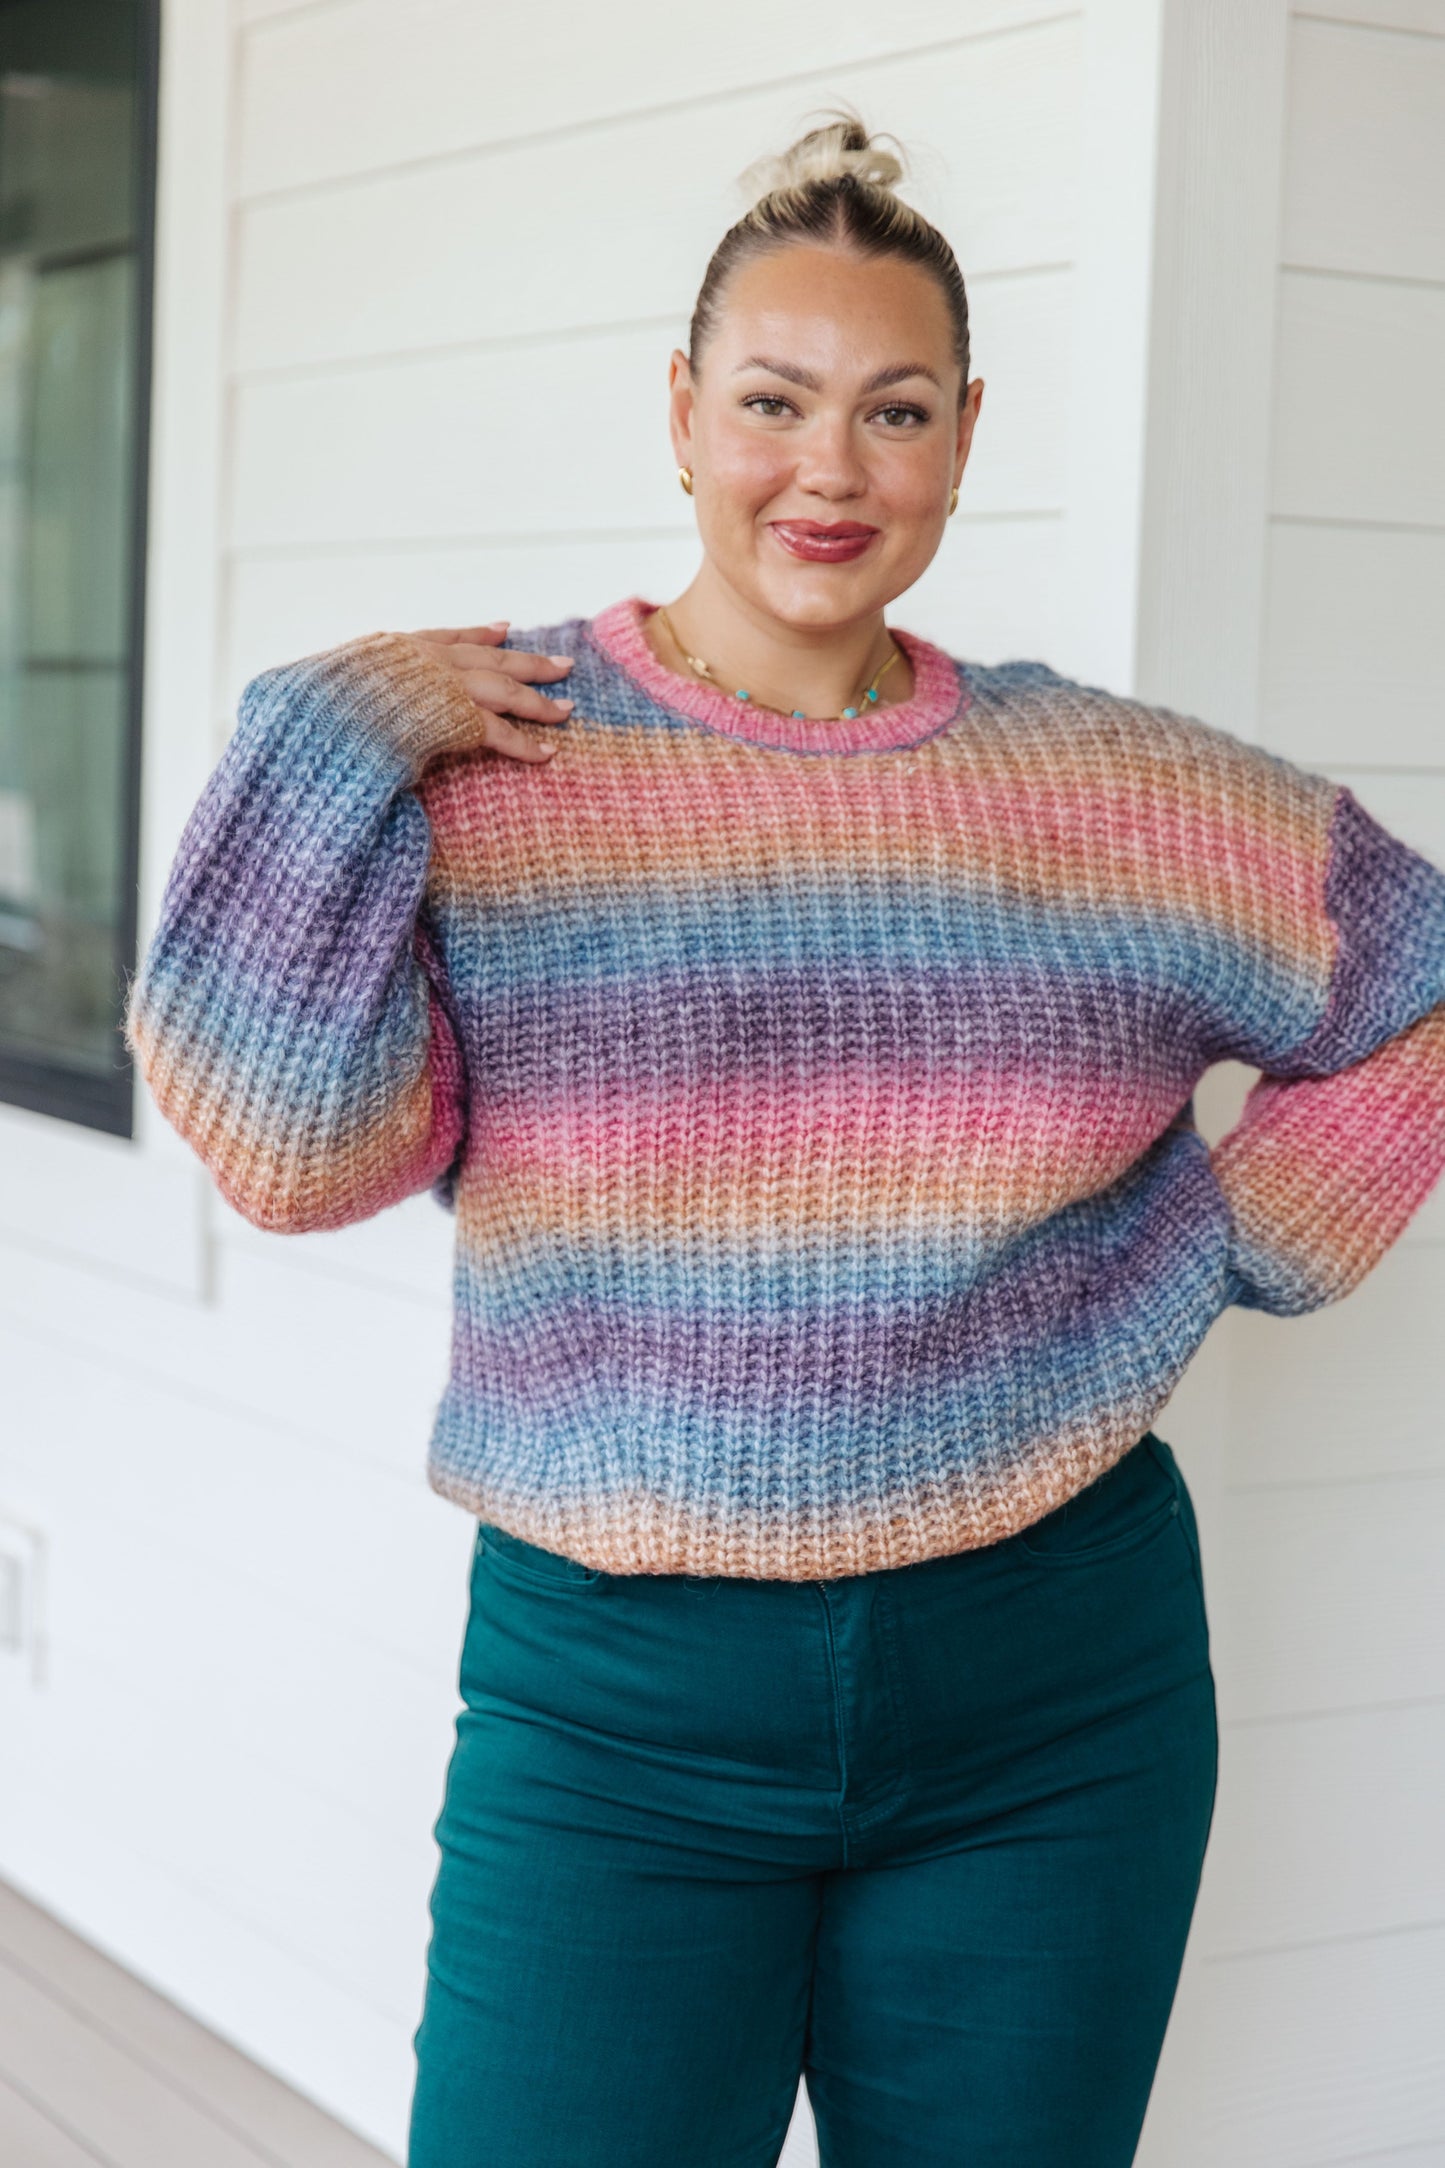 Make Your Own Kind of Music Rainbow Sweater